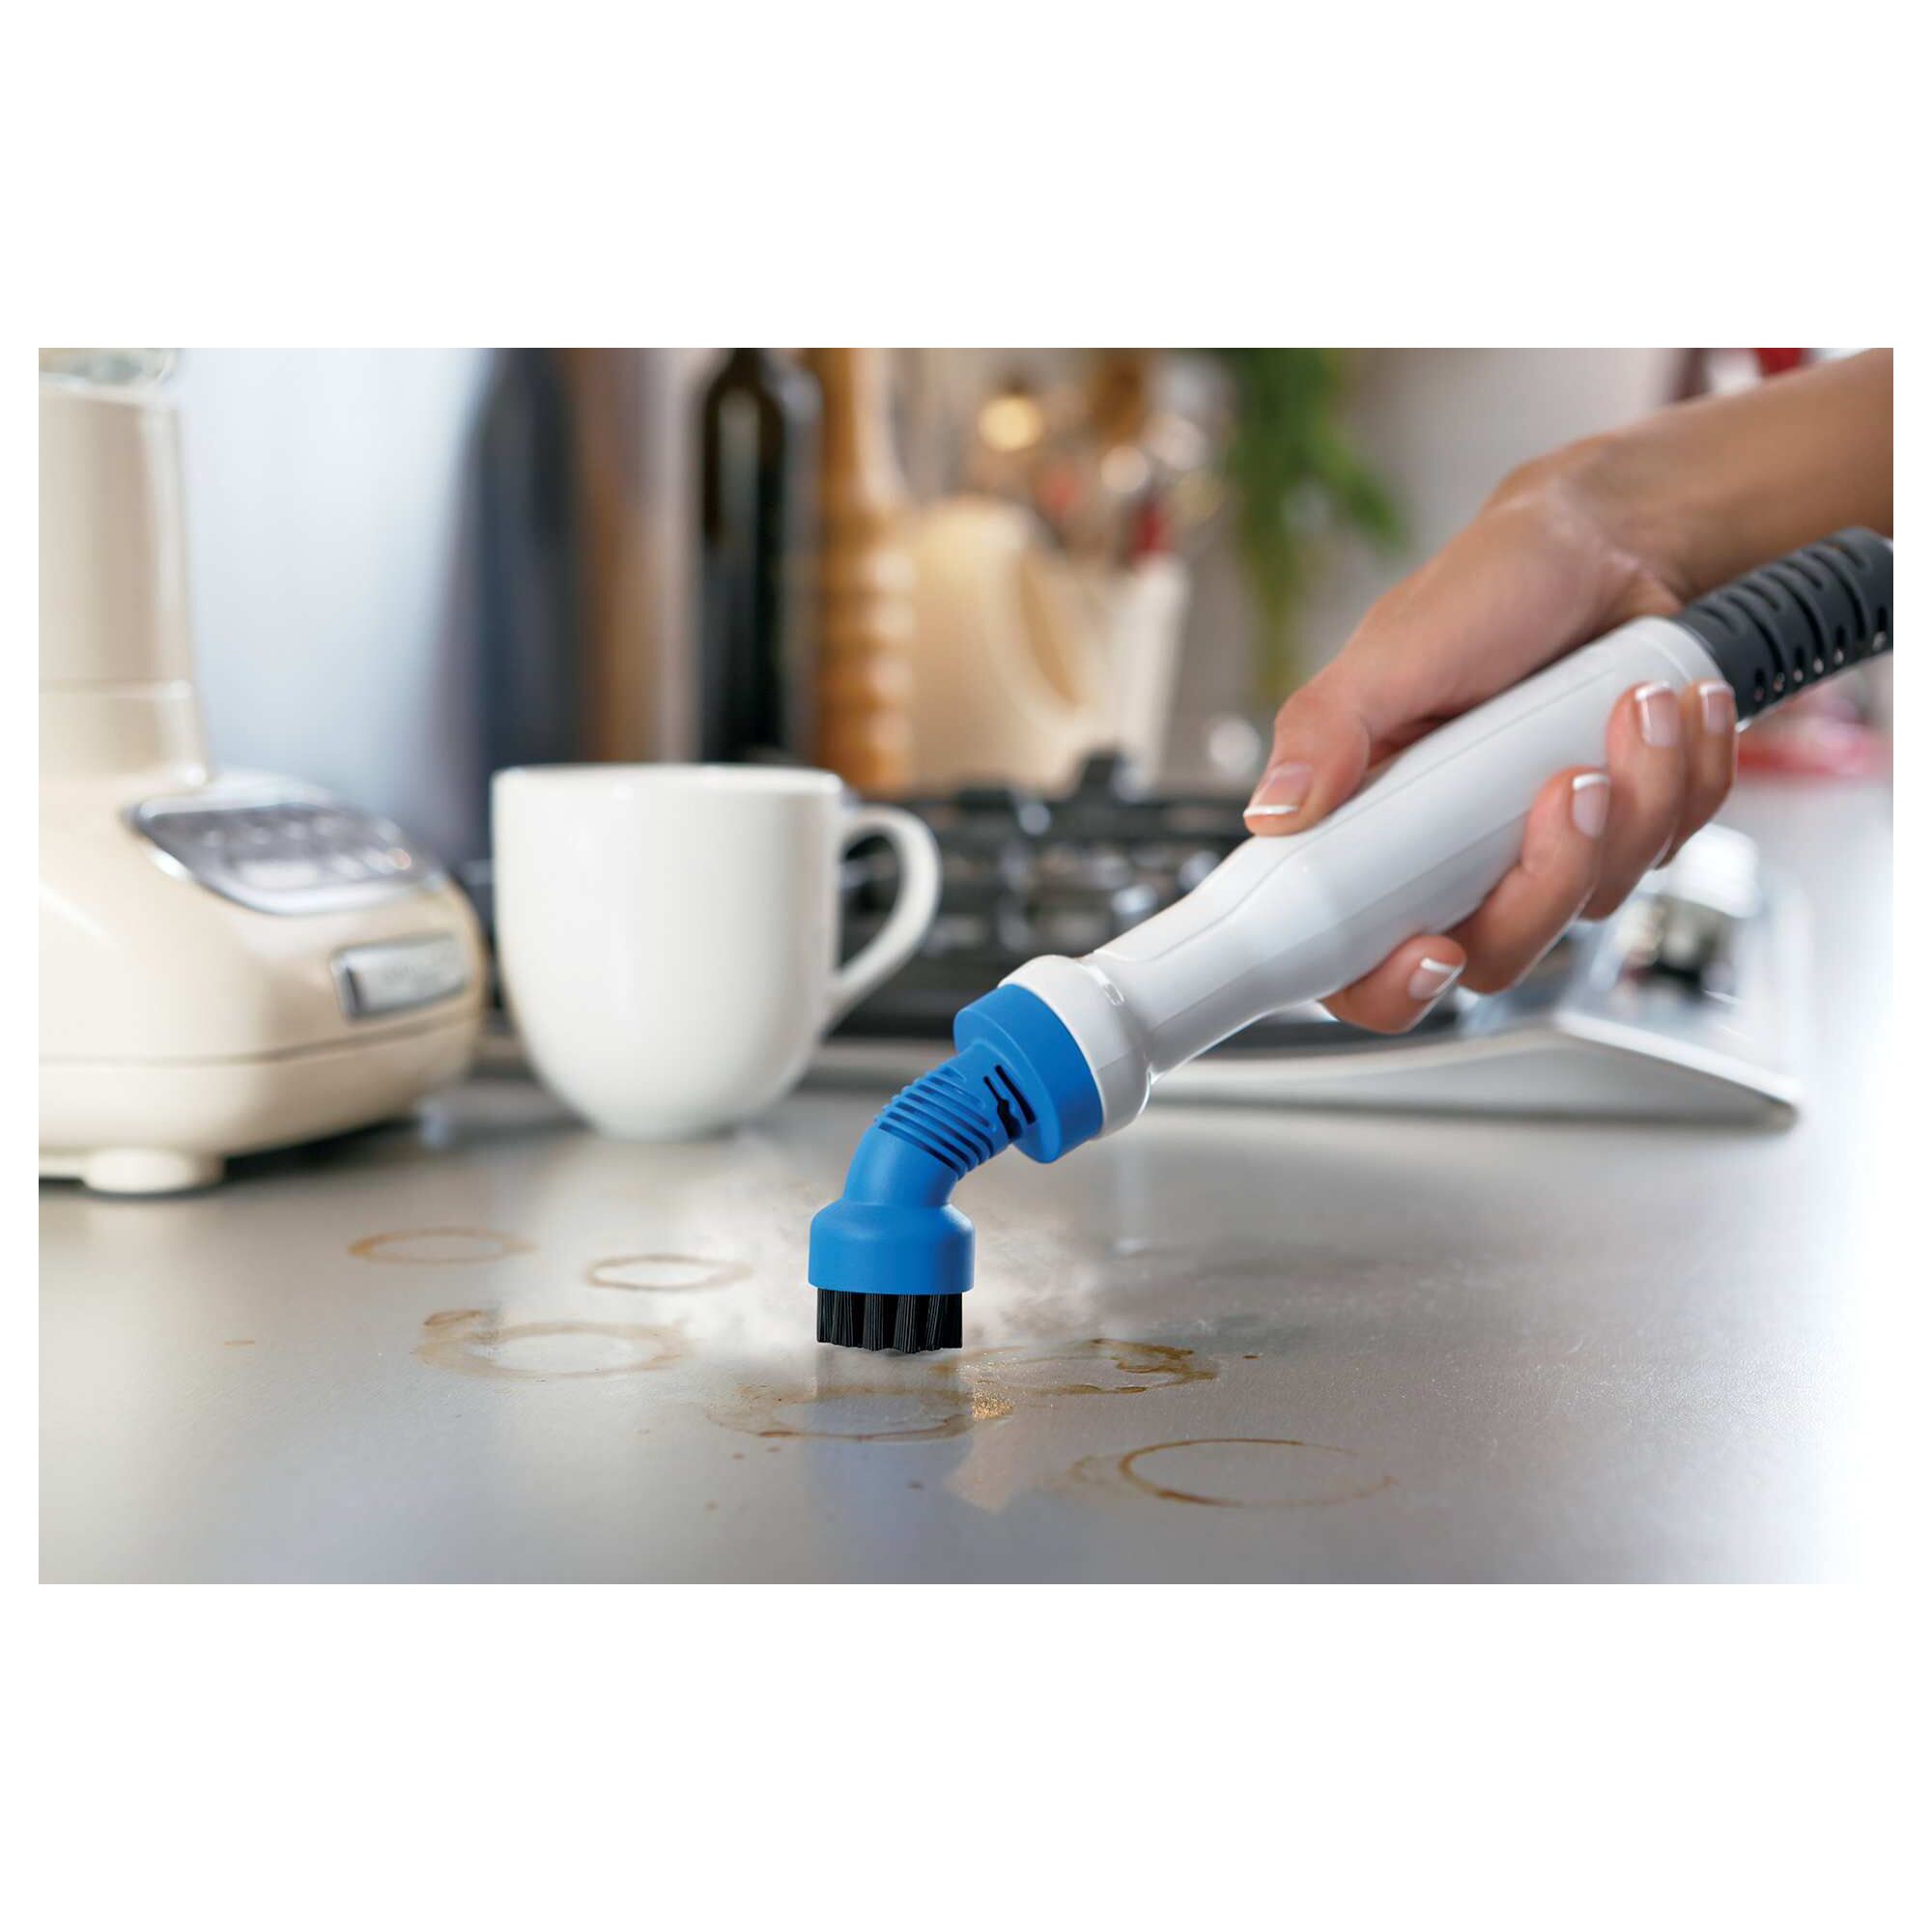 8 in 1 Complete Steam Cleaning System being used to clean stains on a table.